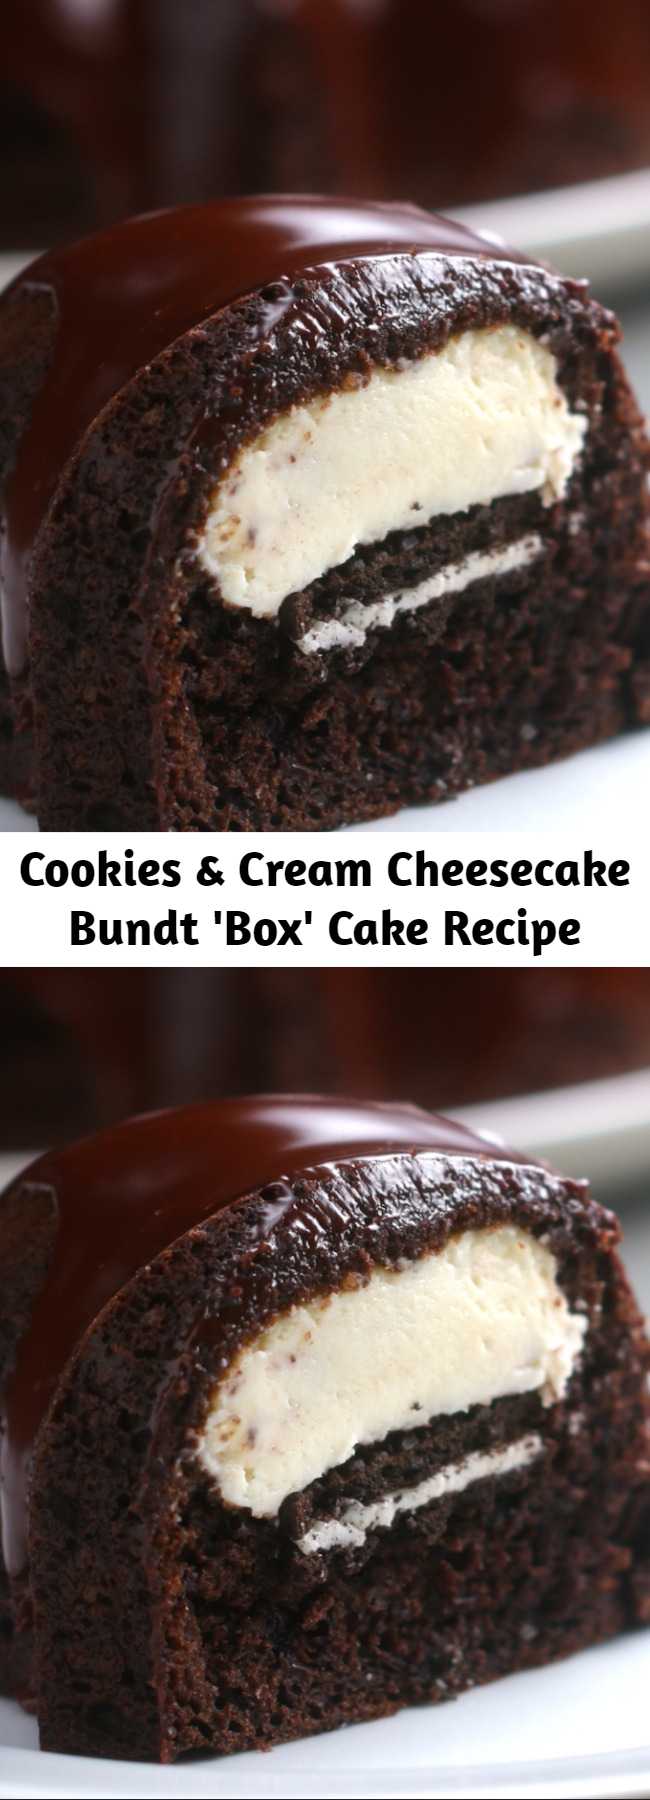 Cookies & Cream Cheesecake Bundt 'Box' Cake Recipe - Who could beat this Cheesecake Filled Chocolate Bundt Cake with its rich yet tender chocolate cake, surprise cheesecake filling, and thick fudgy glaze? YUM.